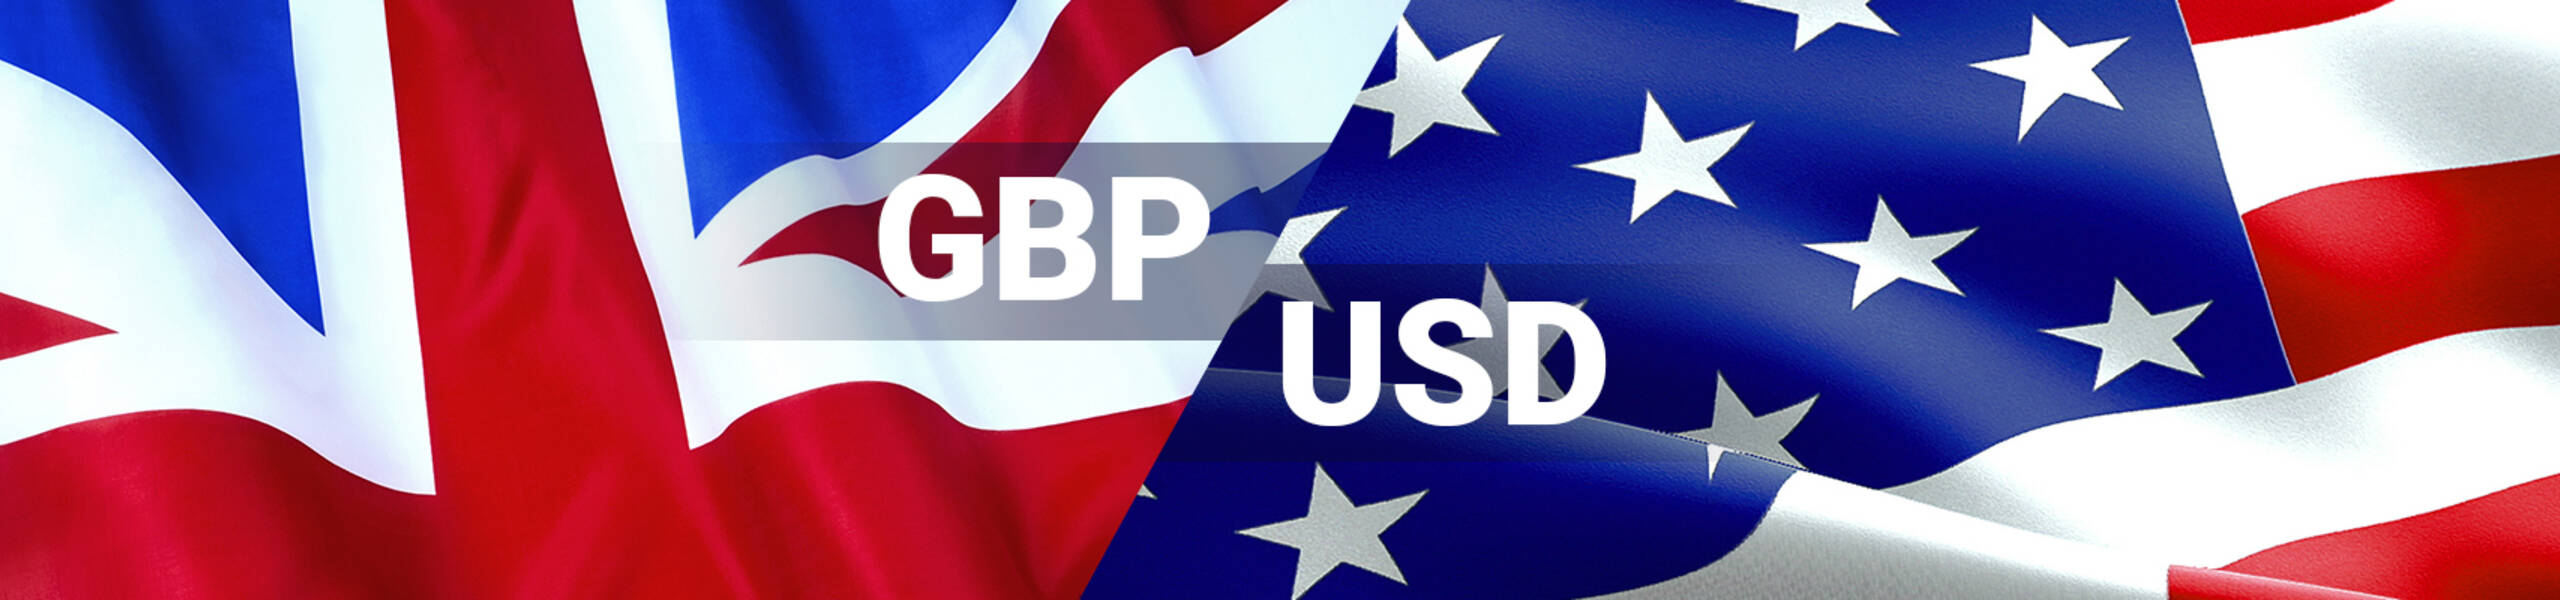 GBP/USD: pound made a new lows